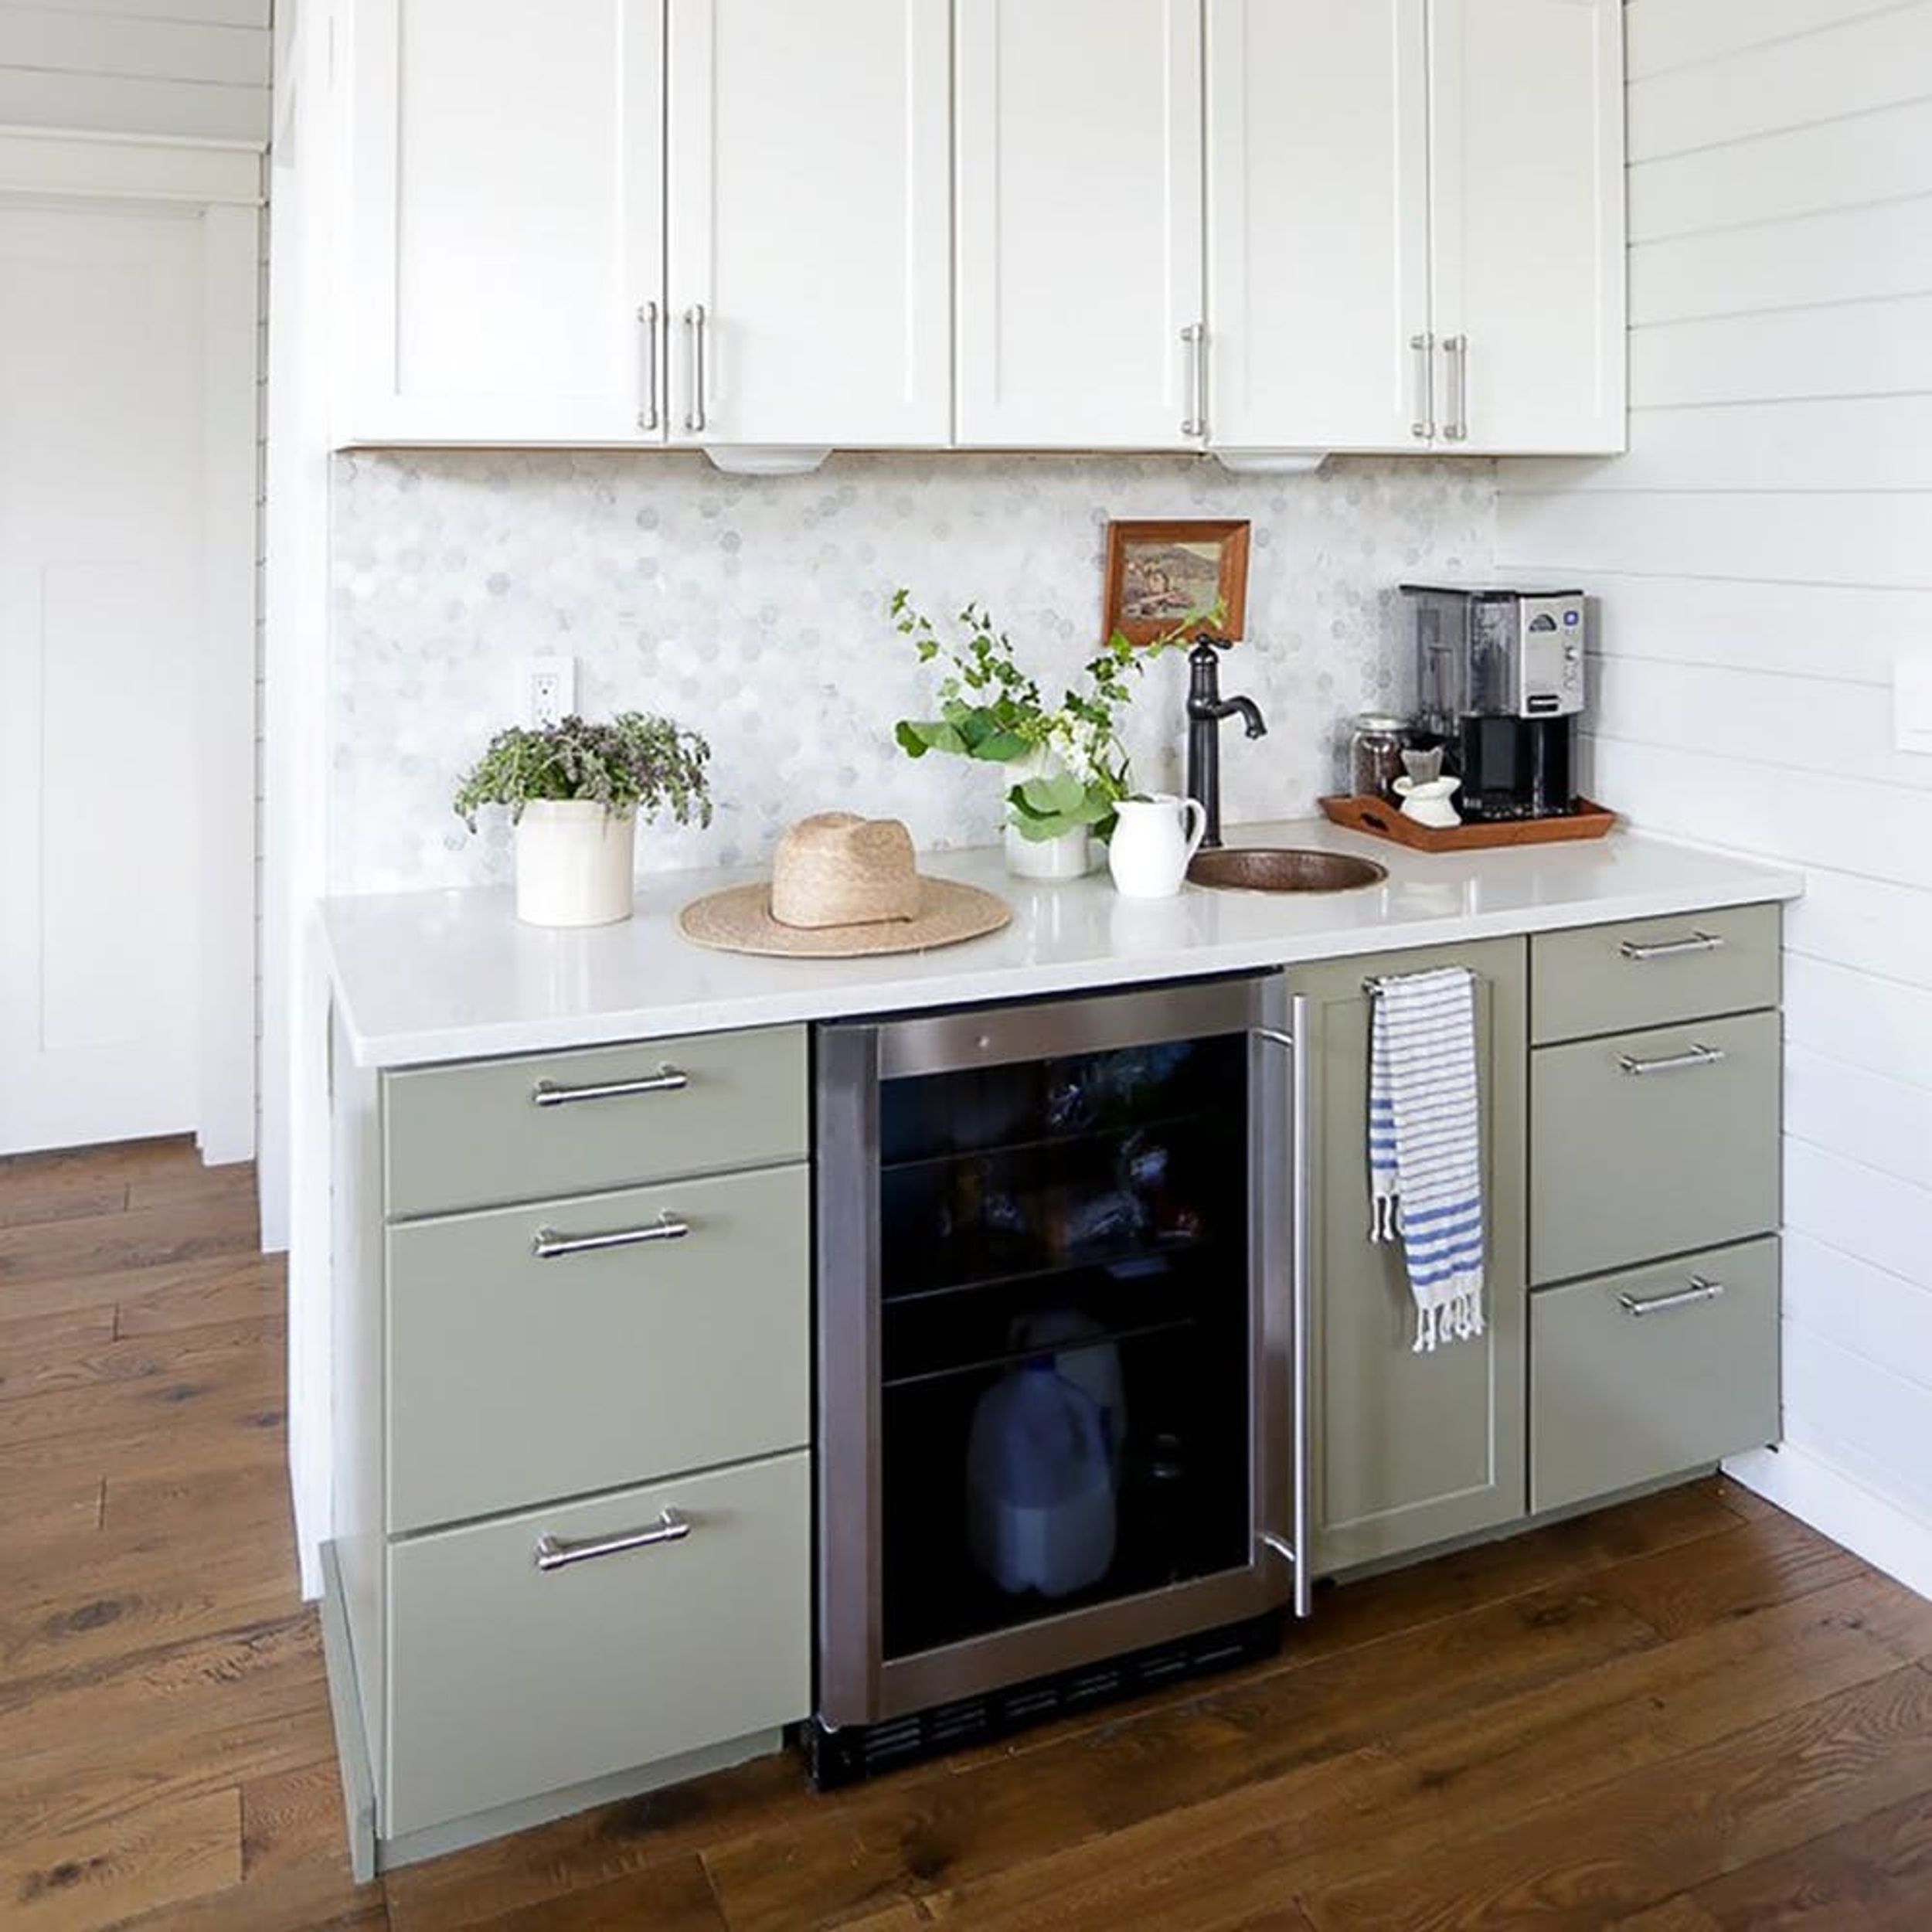 11 Brilliant IKEA Hacks to Transform Your Kitchen and Pantry